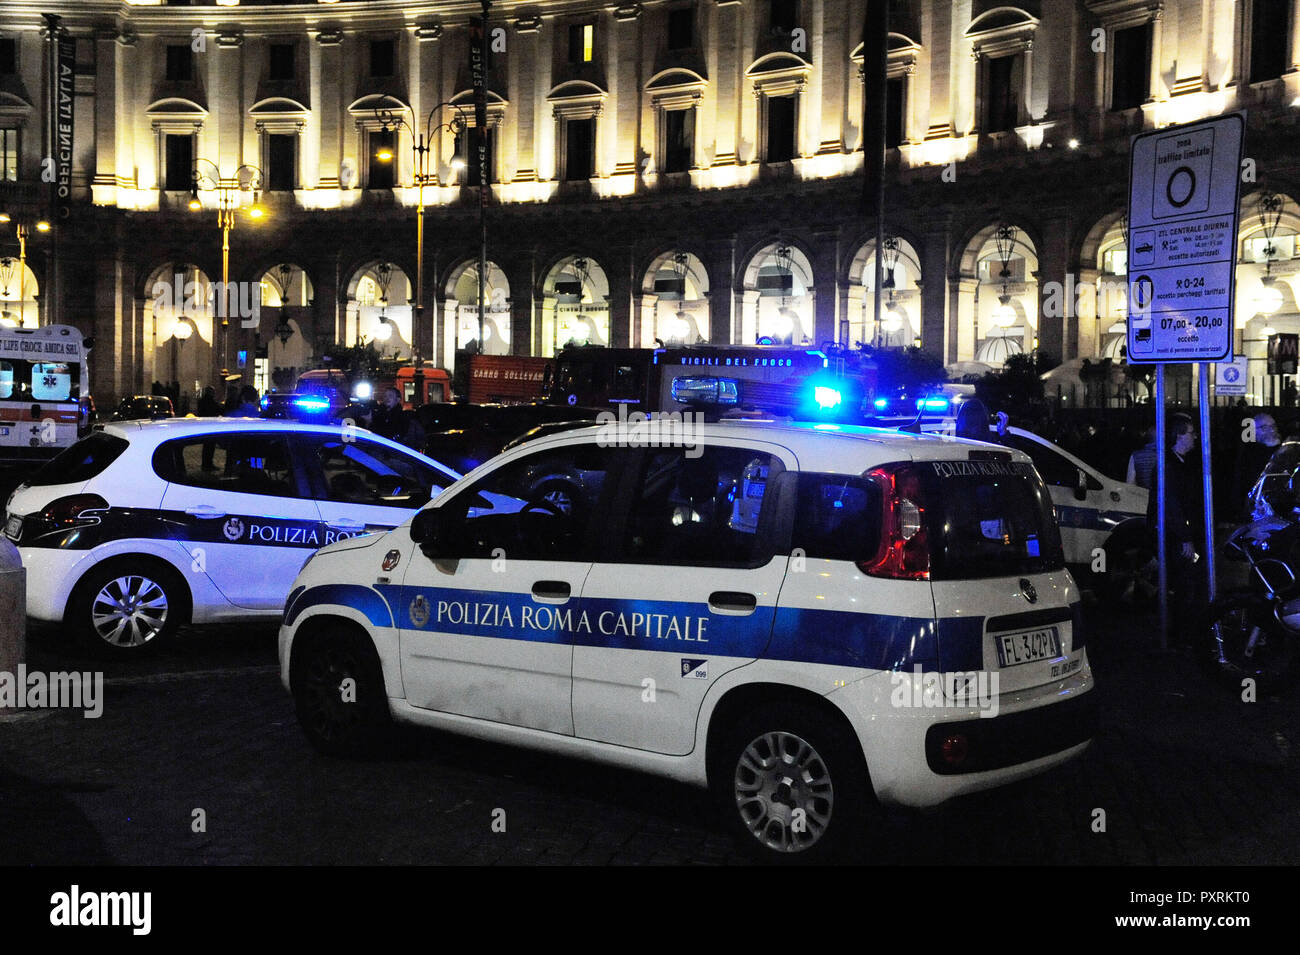 Rome, Italy. 23rd Oct, 2018. Police cars are seen outside the metro station where an escalator collapsed in Rome, Italy, on Oct. 23, 2018. At least 20 Russian football fans were injured when an escalator at a busy Rome metro station collapsed on Tuesday night, local media reported. Credit: Chen Zhanjie/Xinhua/Alamy Live News Stock Photo